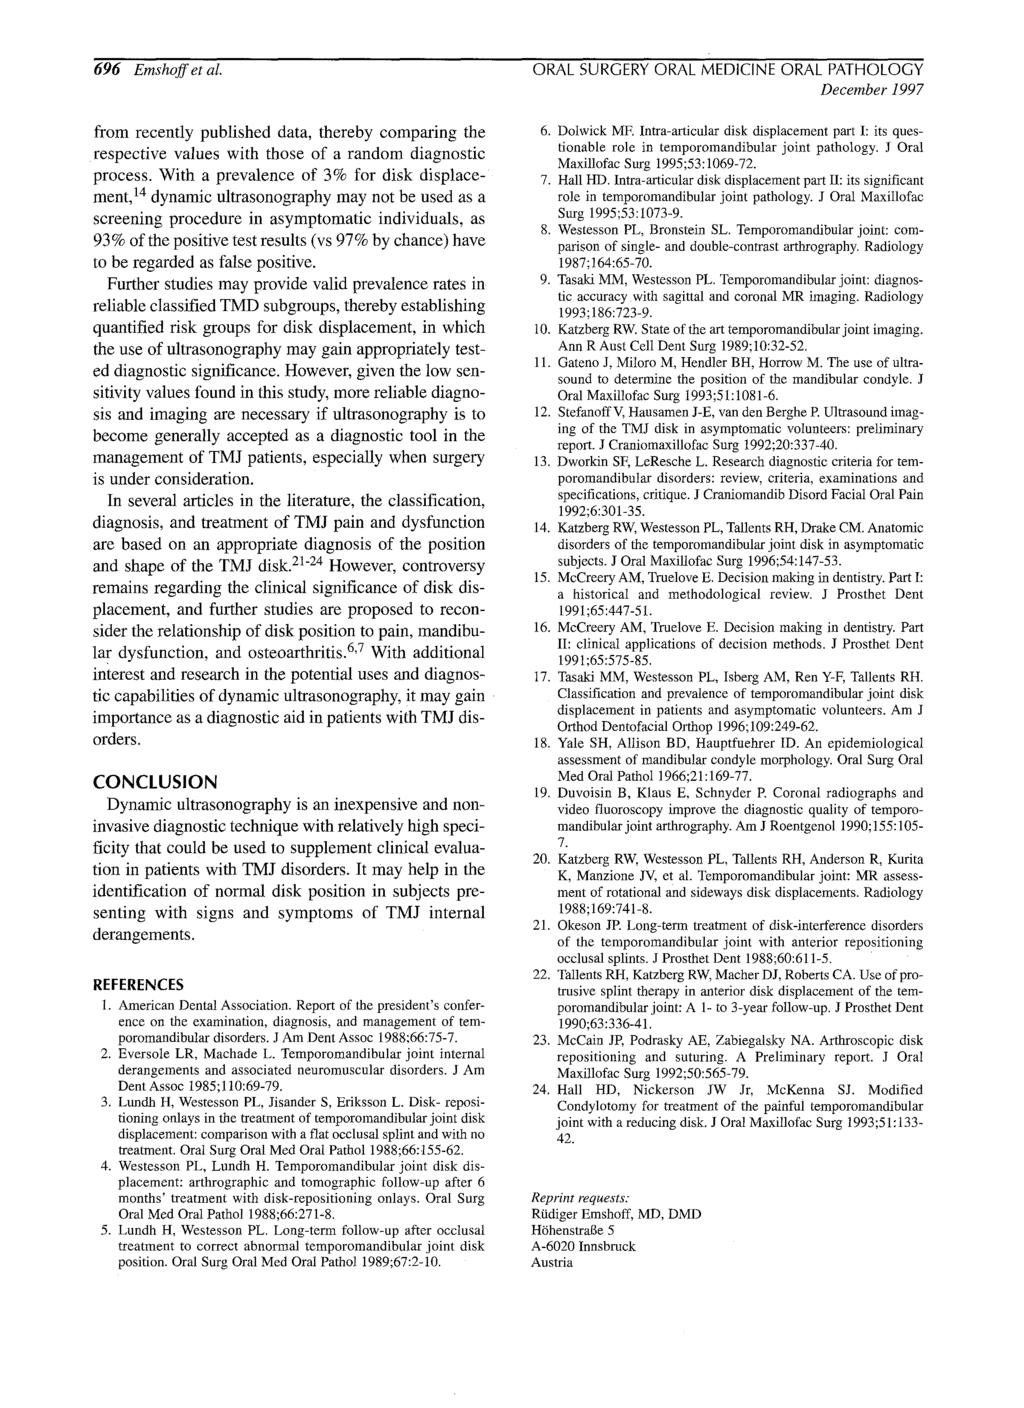 696 Emshoffet al. ORAL SURGERY ORAL MEDICINE ORAL PATHOLOGY December 1997 from recently published data, thereby comparing the respective values with those of a random diagnostic process.